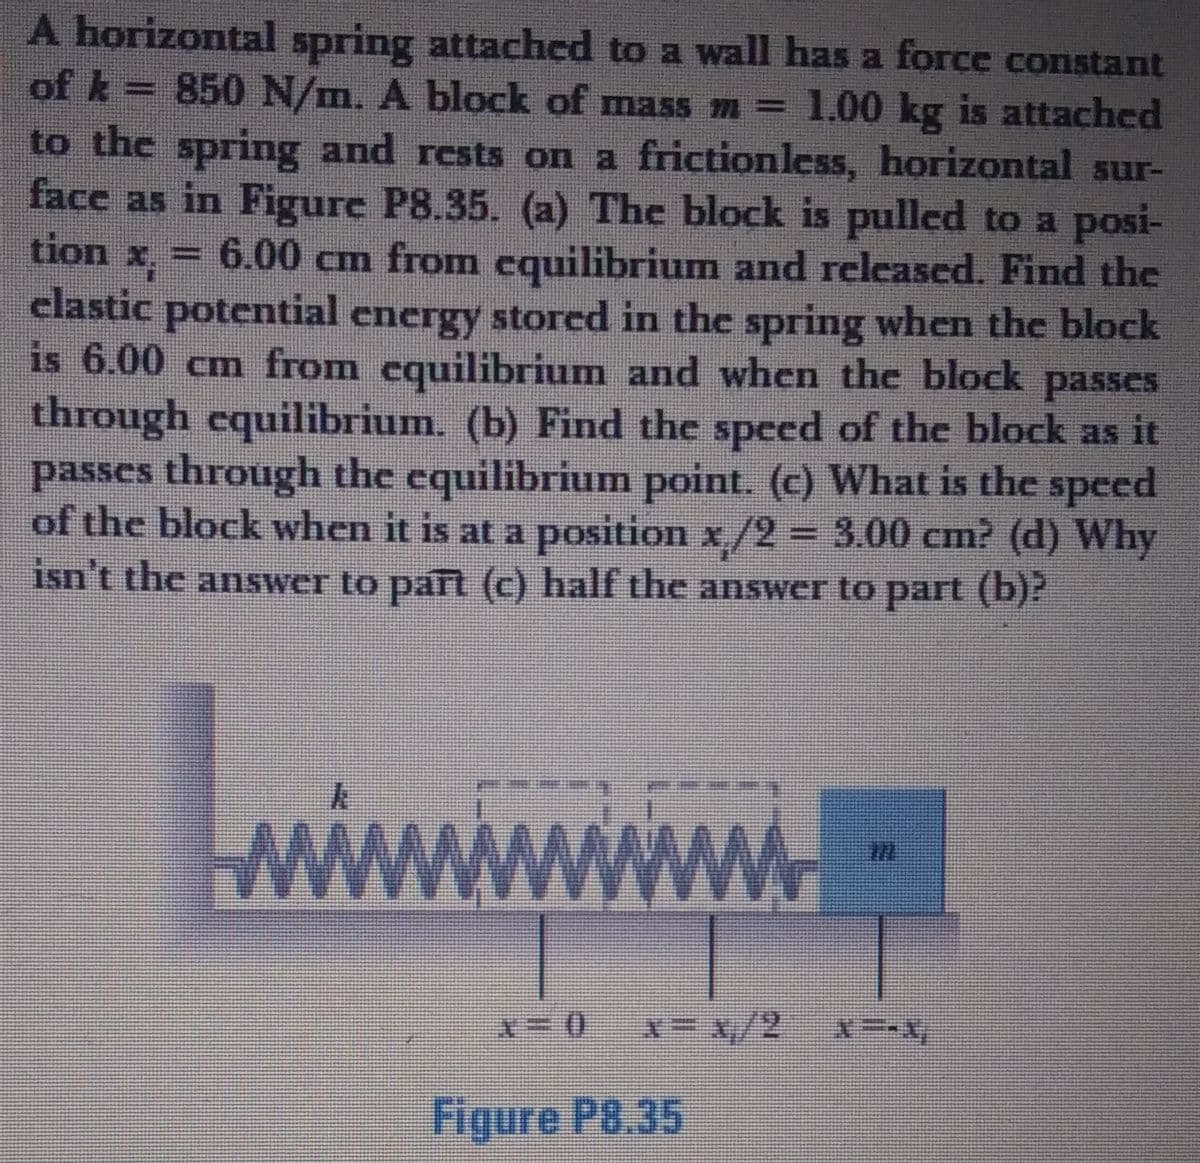 A horizontal spring attached to a wall has a force constant
of k= 850 N/m. A block of mass m = 1.00 kg is attached
to the spring and rests on a frictionless, horizontal sur-
face as in Figure P8.35. (a) The block is pulled to a posi-
tion x,
6.00 cm from cquilibrium and released. Find the
clastic potential energy stored in the spring when the block
is 6.00 cm from cquilibrium and when the block passes
through equilibrium. (b) Find the speed of the block as it
passes through the equilibrium point. (c) What is the speed
of the block when it is at a position x/2 = 3.00 cm? (d) Why
isn't the answer to part (c) half the answer to part (b)?
wwww
/2
Figure P8.35
